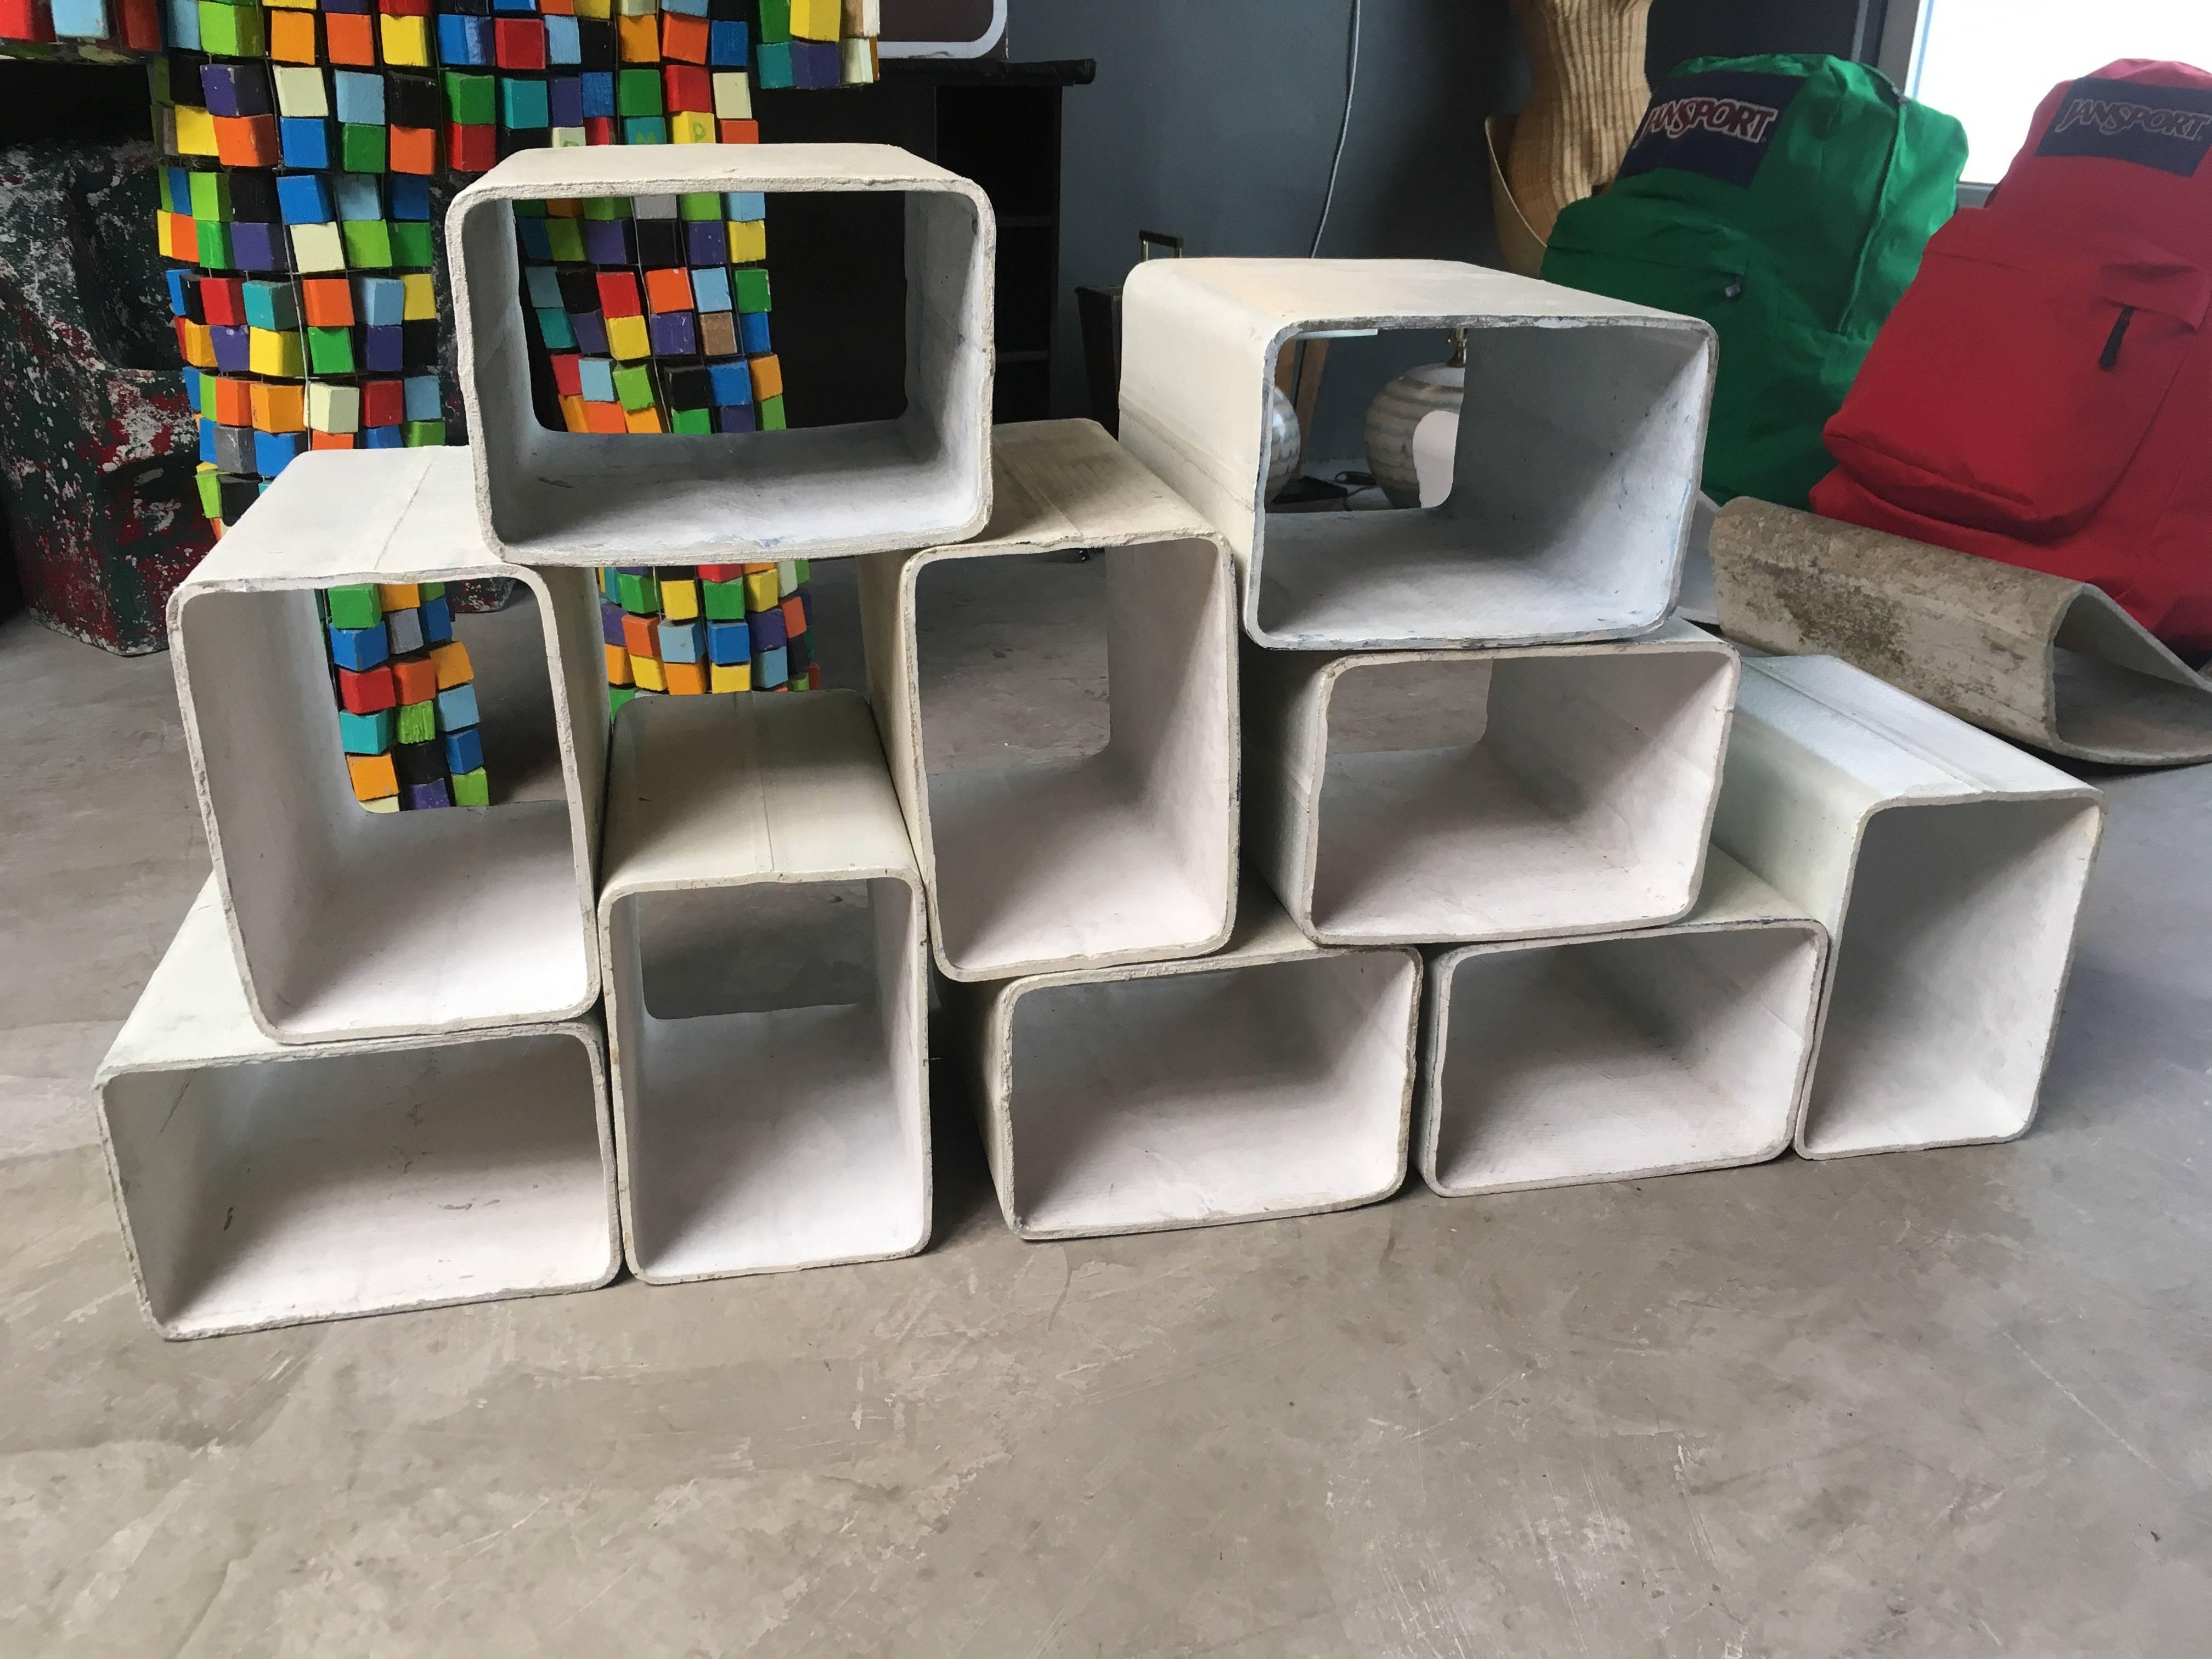 Fantastic set of ten modular cement cubes by Swiss architect Willy Guhl for Eternit. Very rare set in great vintage condition. Unit consists of ten large square/rectangular cubes. Can be arranged in a multitude of ways. Great standalone sculpture